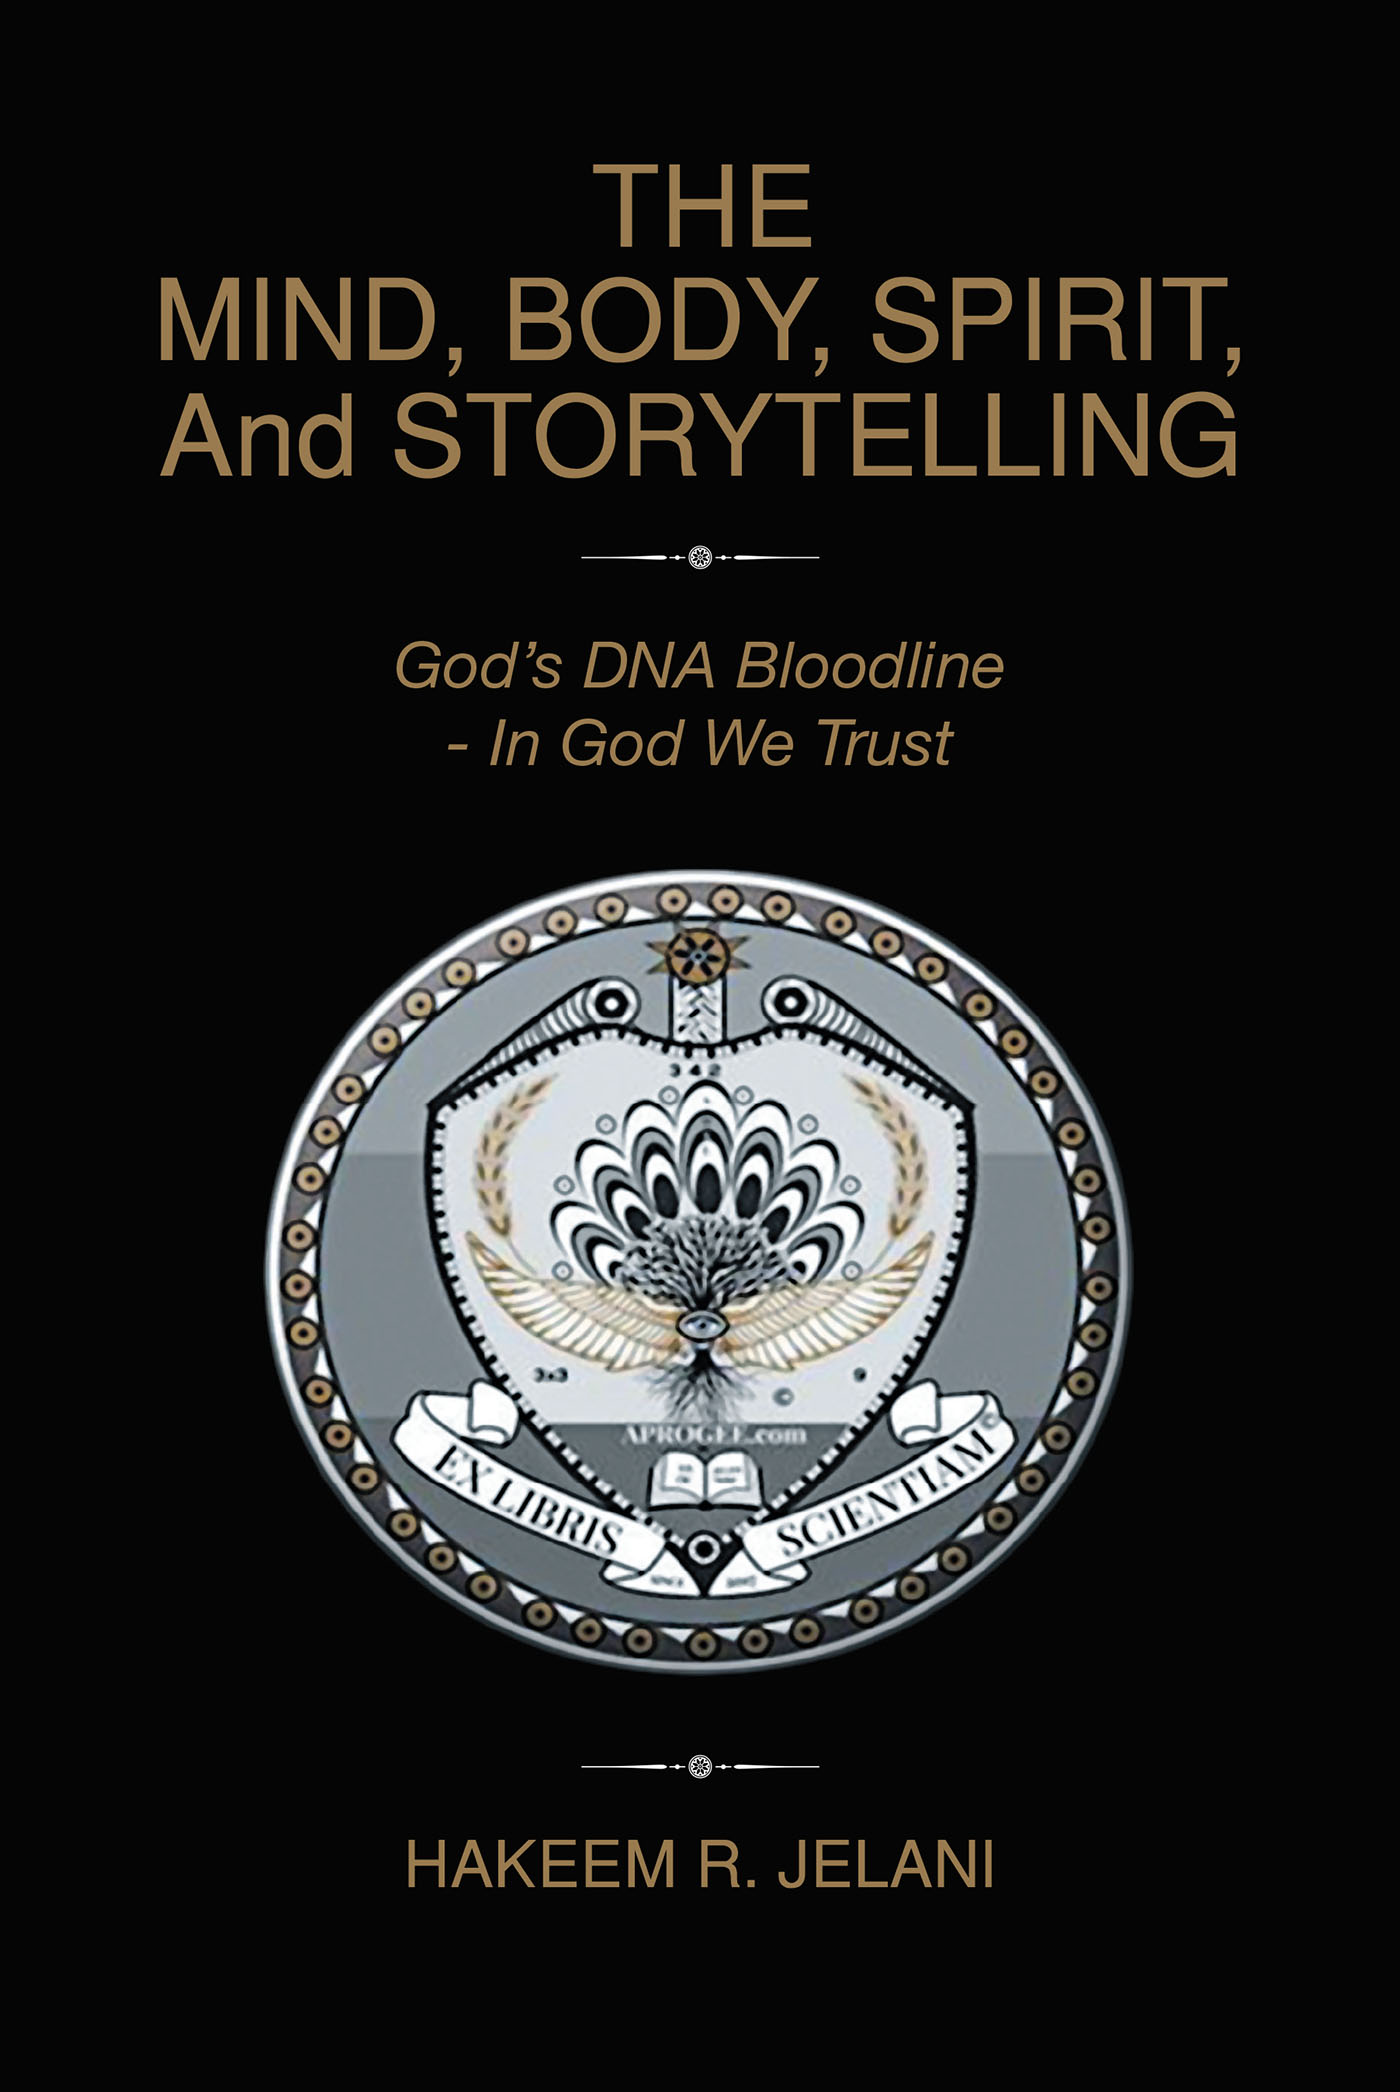 Author Hakeem R. Jelani’s New Book, “The Mind, Body, Spirit, And Storytelling: God's DNA Bloodline - In God We Trust,” Presents a New Perspective on the Book of Genesis